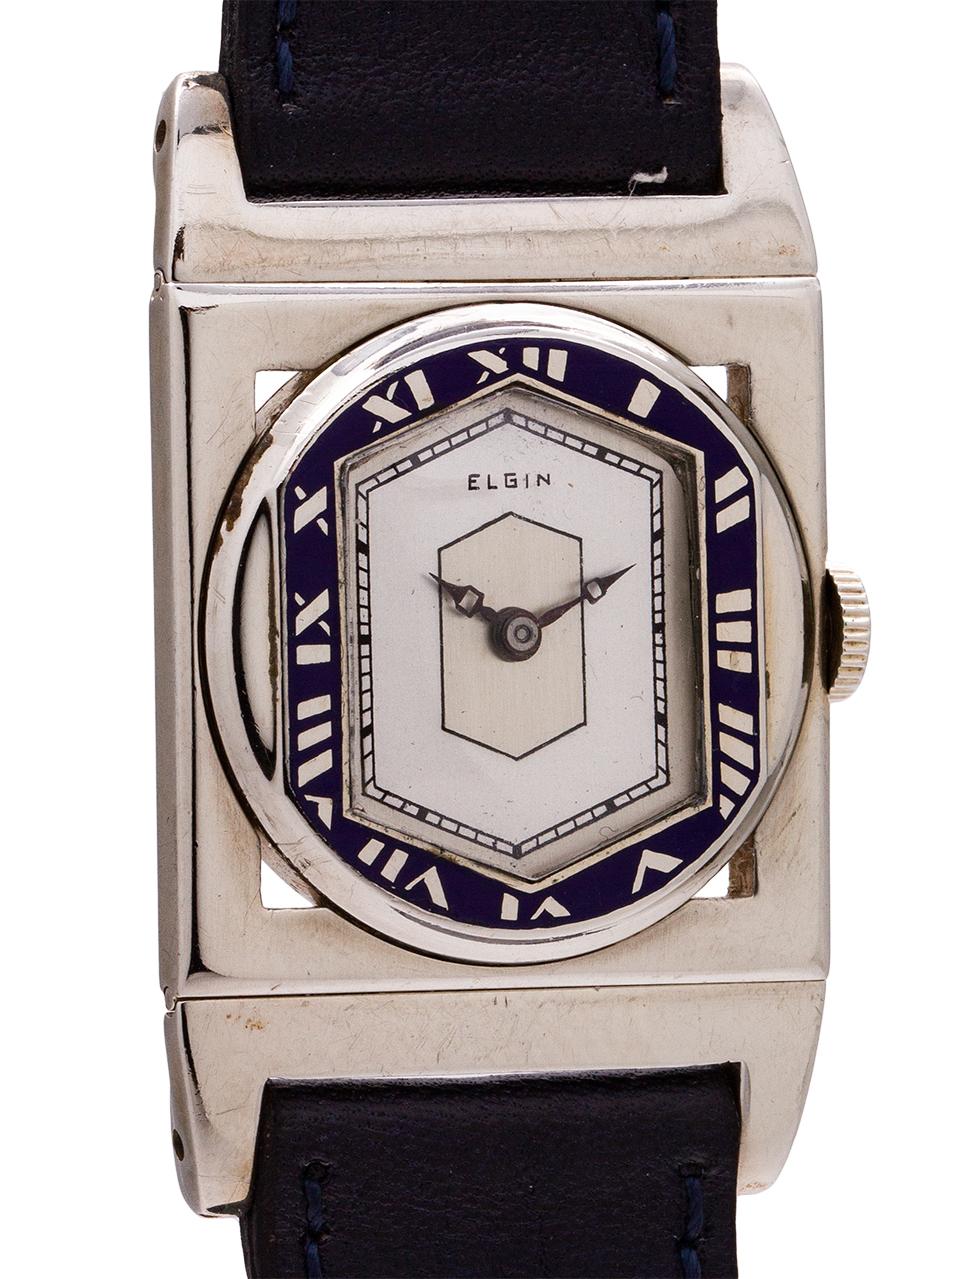 
Vintage Elgin 14K white gold  “Presentation” model circa 1929. Featuring an art deco inspired 26 x 40mm rectangular case with hinged lugs and distinctive blue enamel hexagonal shaped Roman numeral chapter ring.  With a nicely restored 2 tone satin